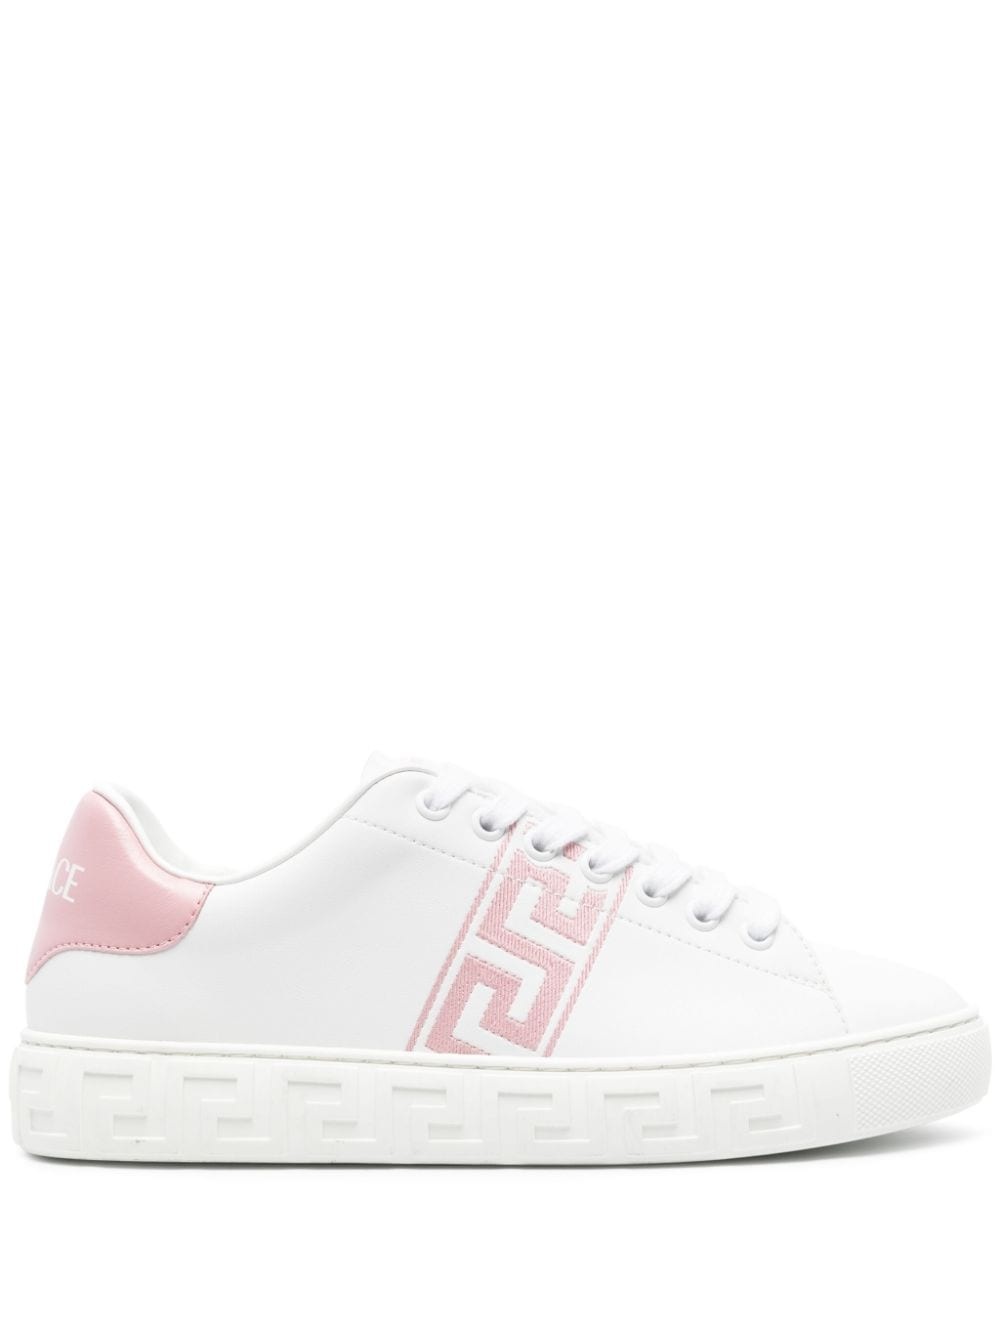 Greca-embroidered sneakers - 1